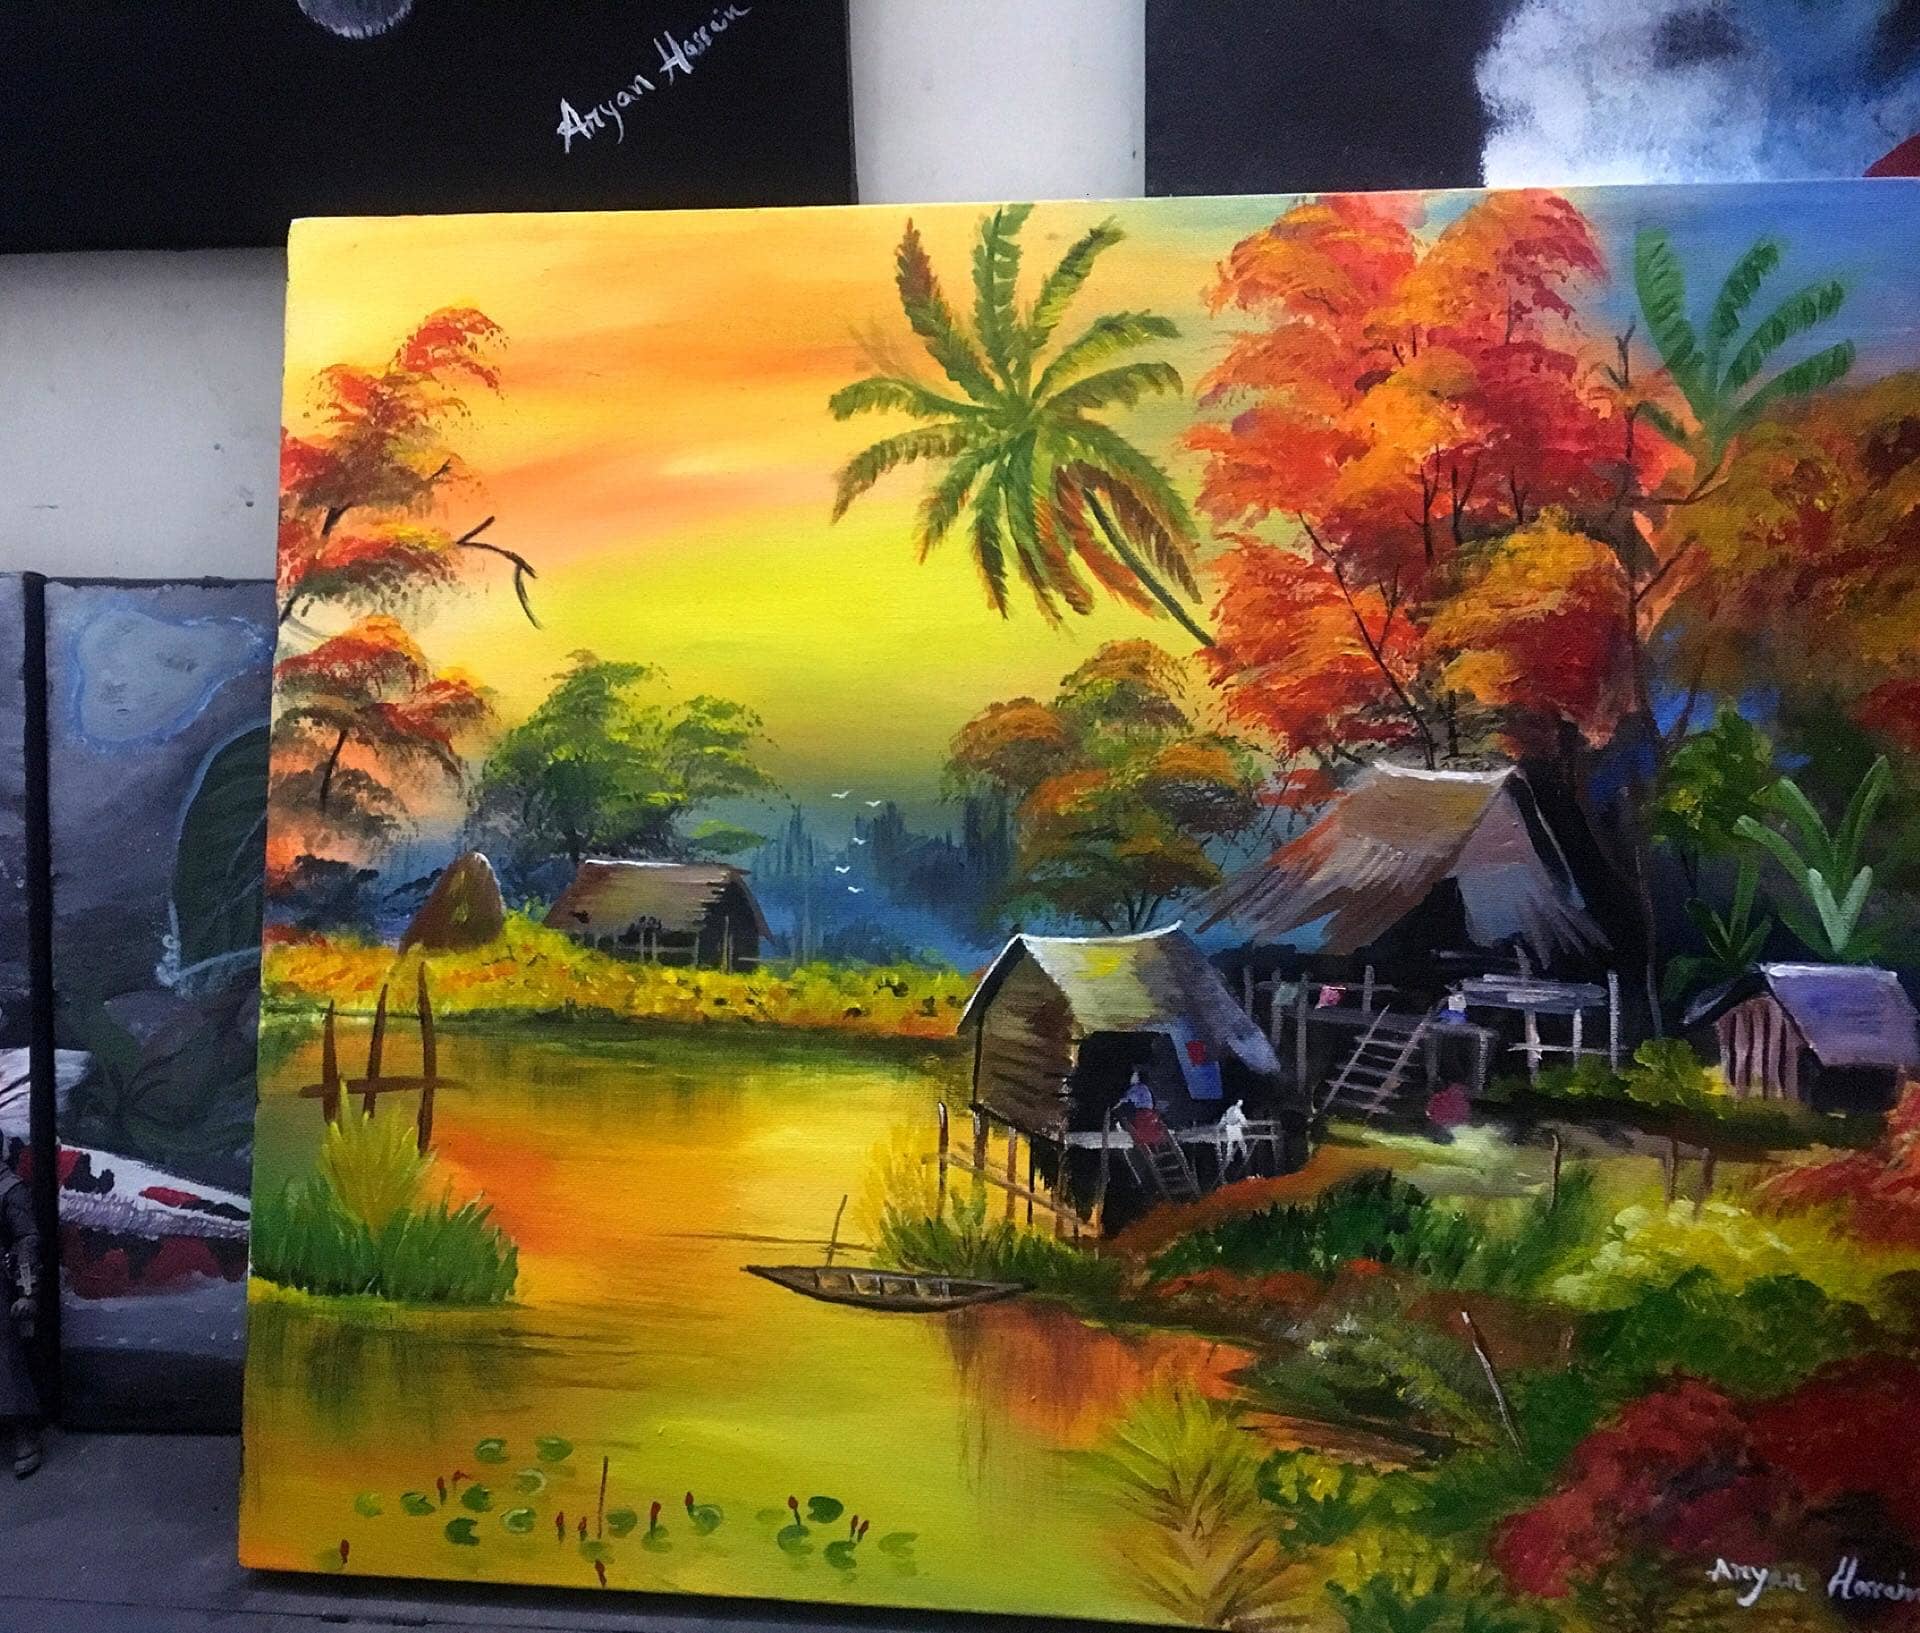 Canvas Acrylic Painting Scenery By Asifuralam Fiverr